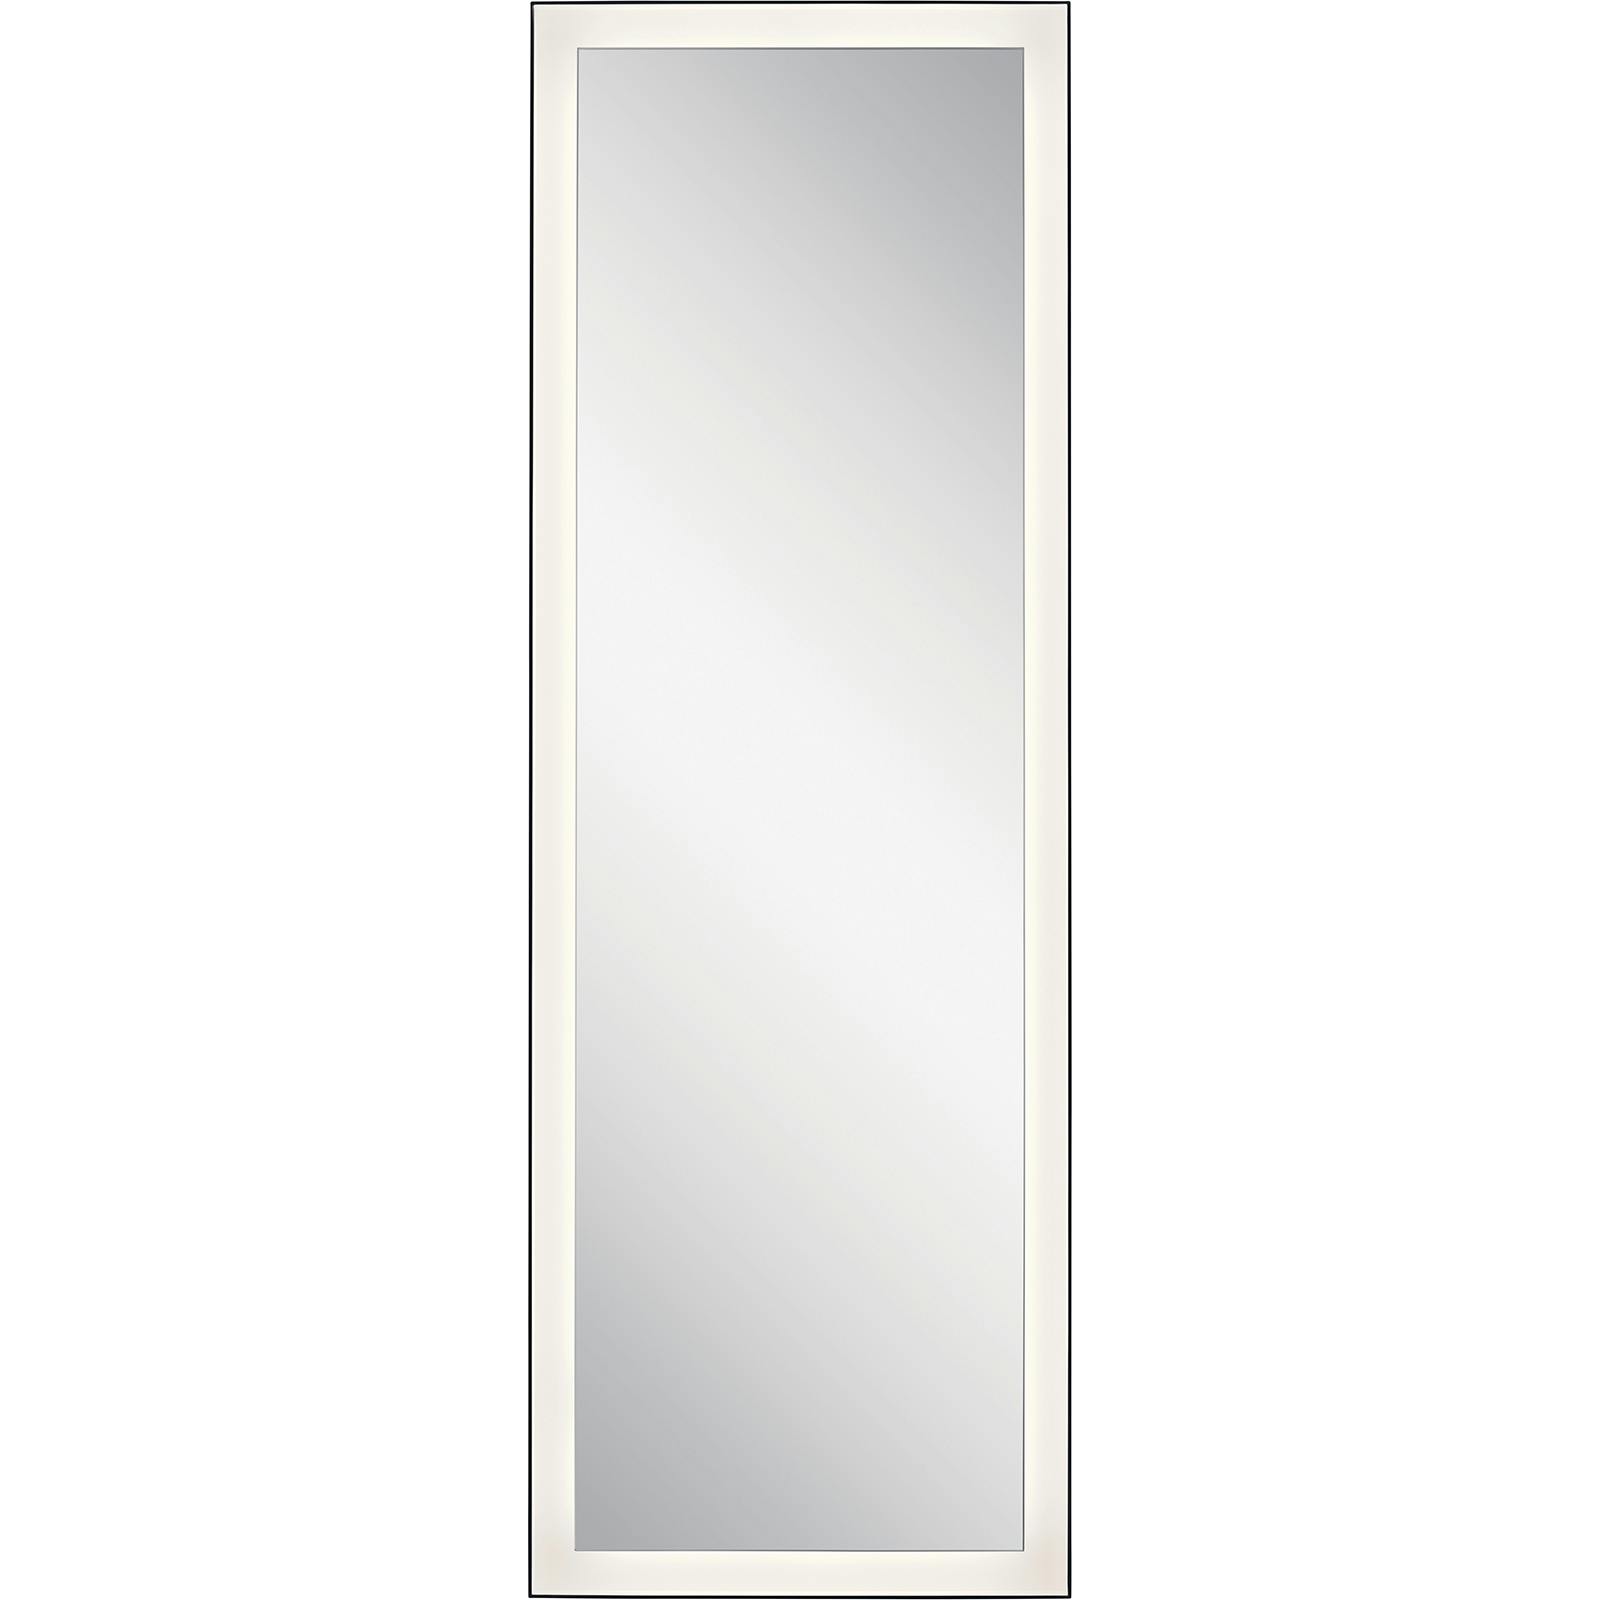 Front view of the Ryame™ 20" Lighted Mirror Black on a white background